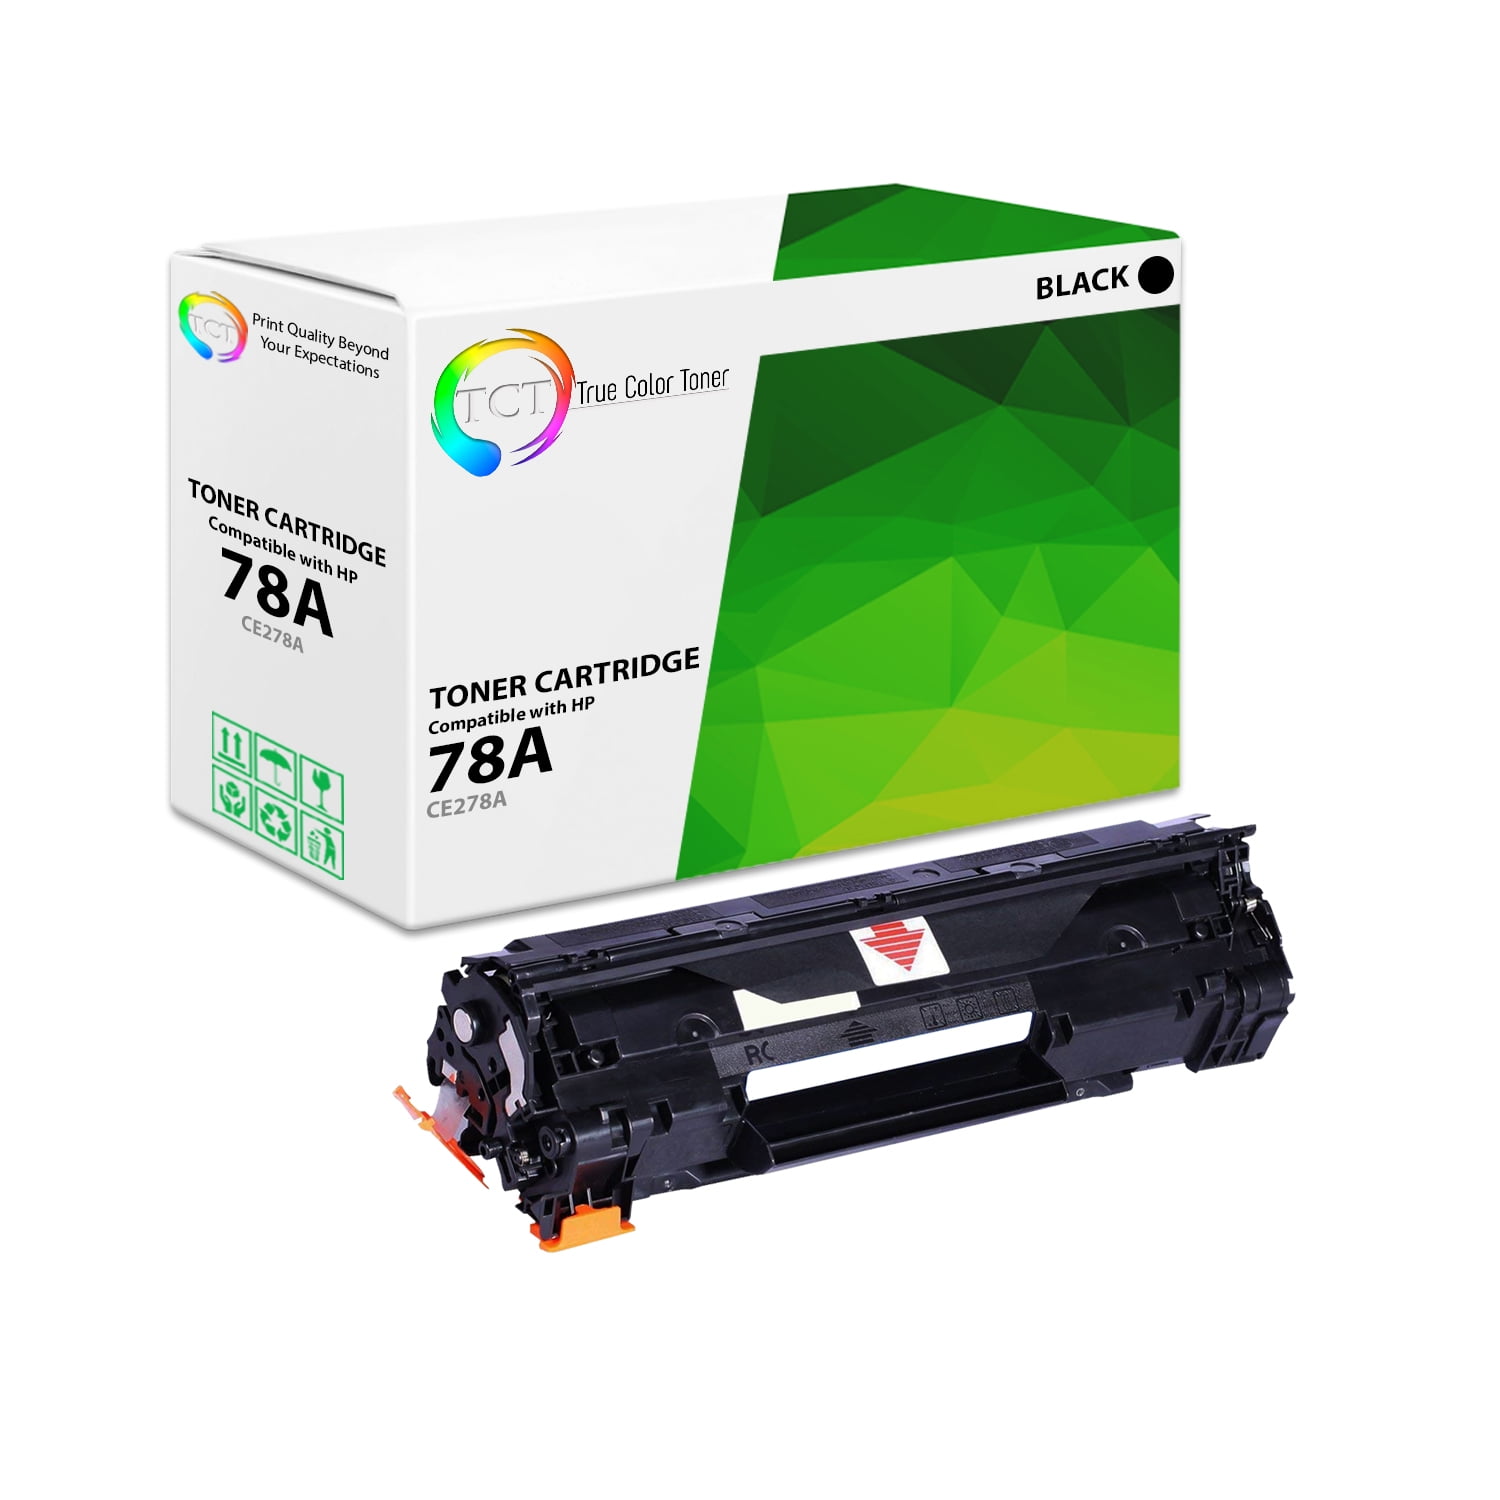 TCT Premium Compatible Toner Cartridge Replacement for HP CF510A Black works with HP Color LaserJet Pro MFP M181FW M154NW Printers (1,100 Pages) - Walmart.com